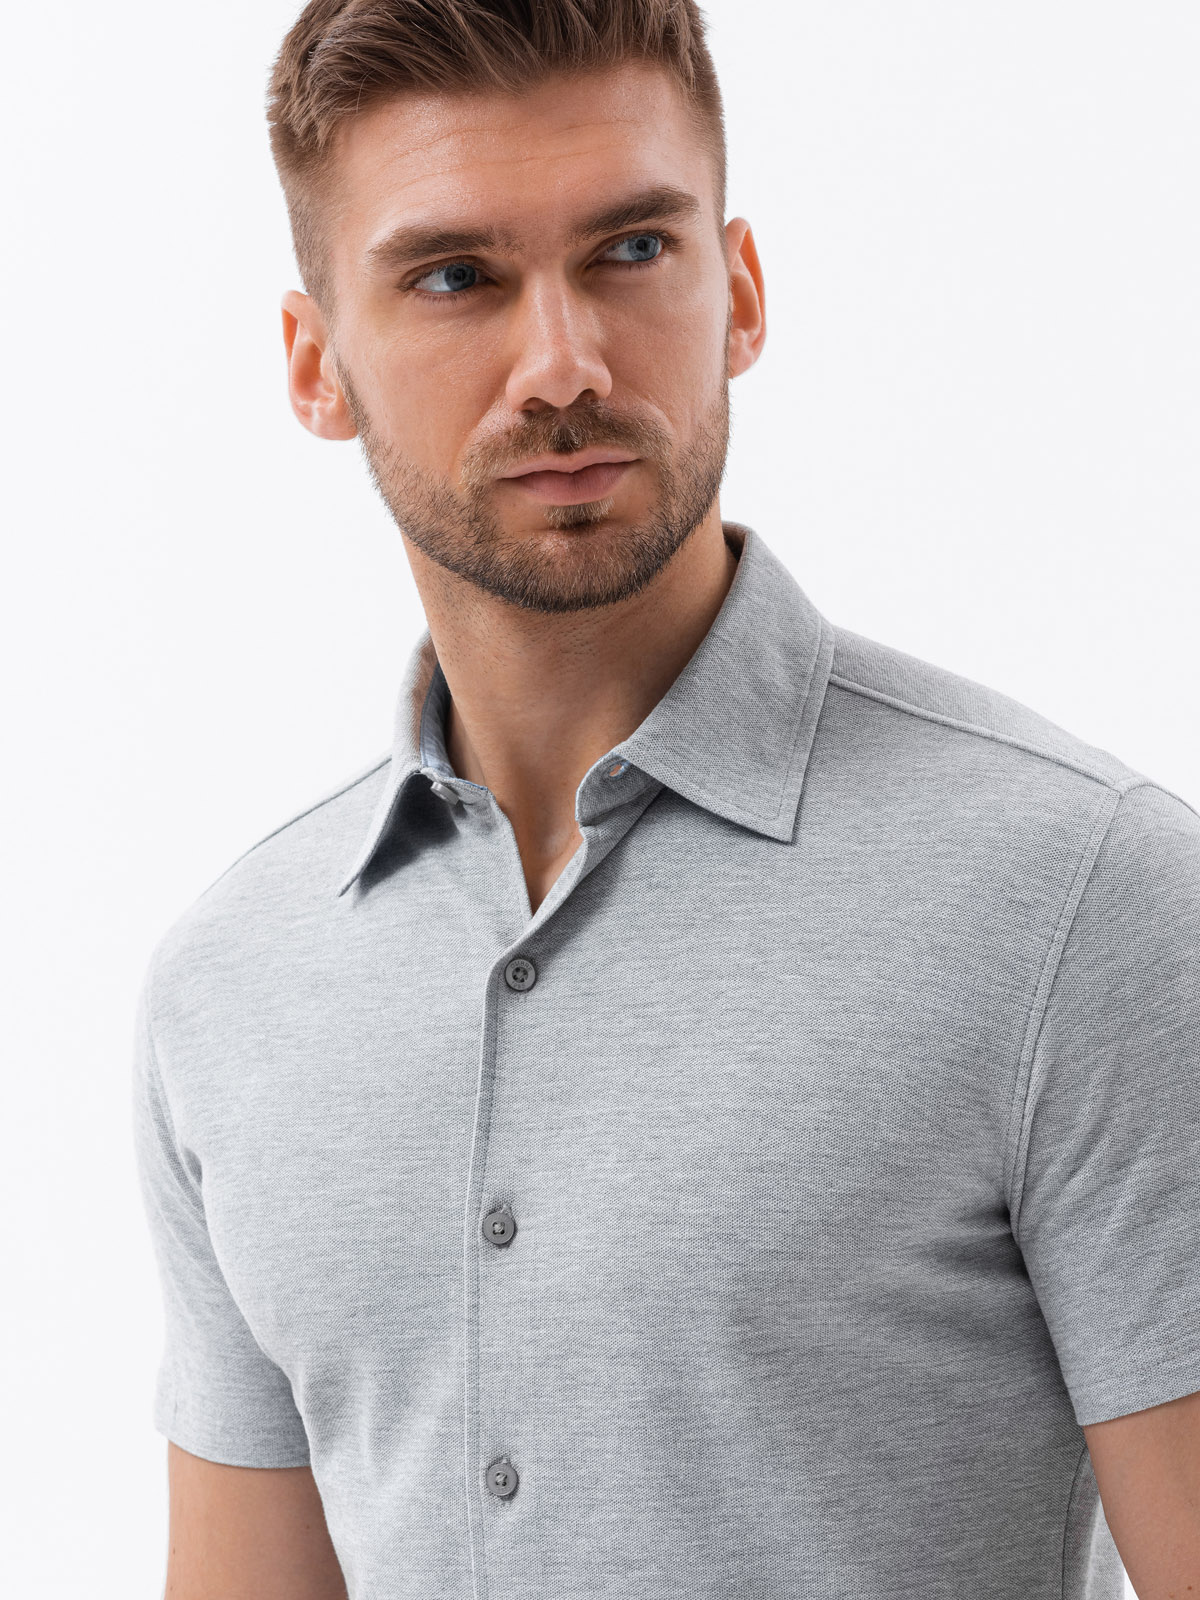 Ombre Men's knitted slim fit shirt with short sleeves and collar - grey